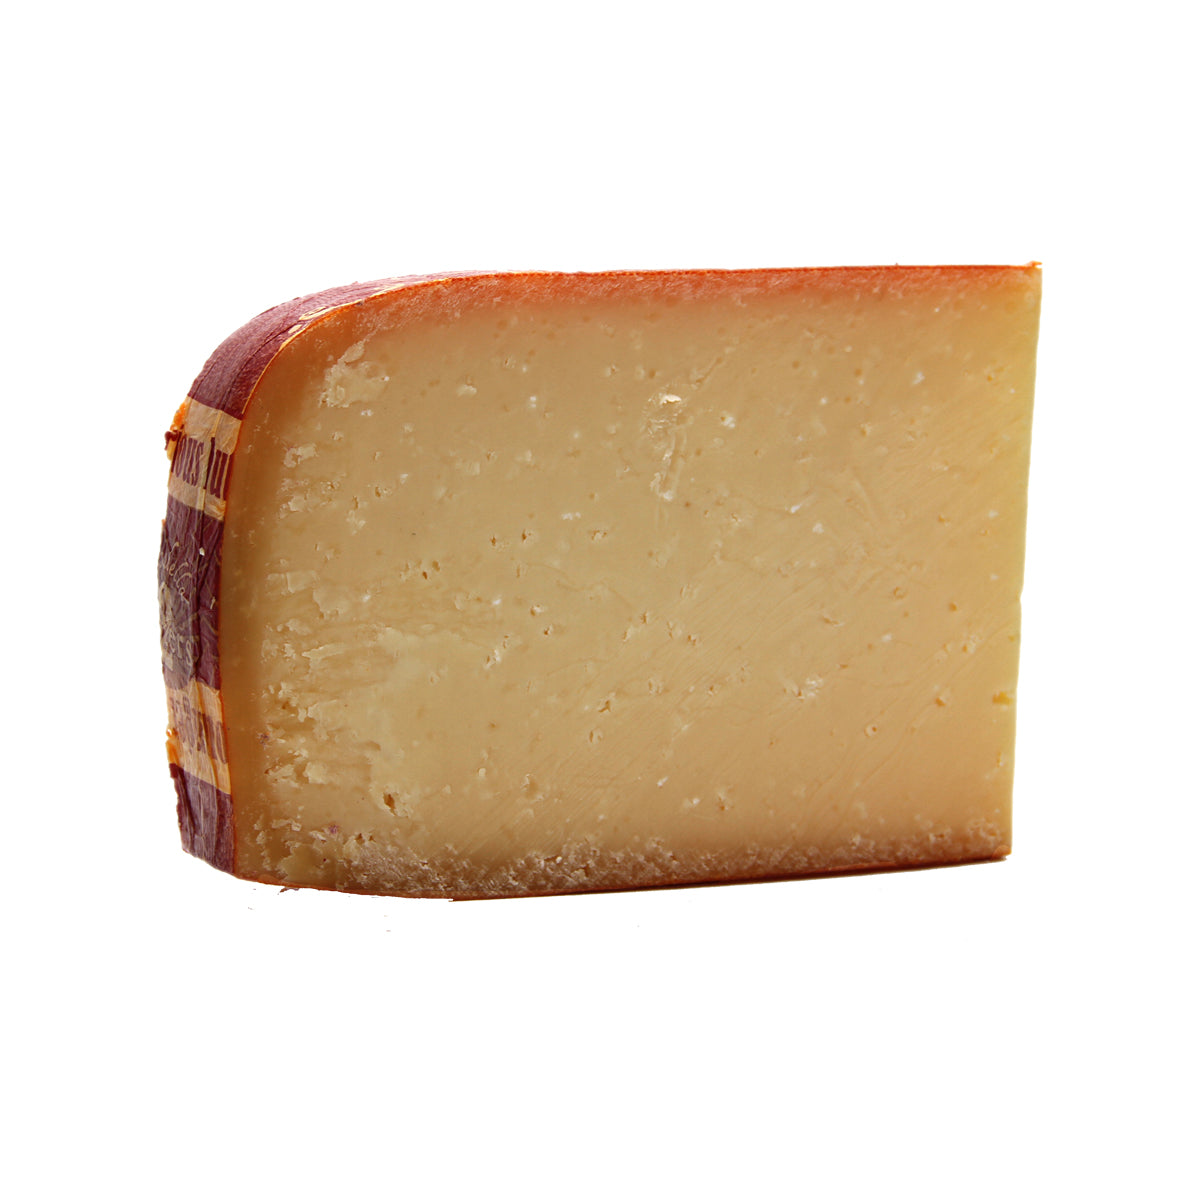 Deli  Two Sisters Isabella 1 Year Aged Gouda Cheese